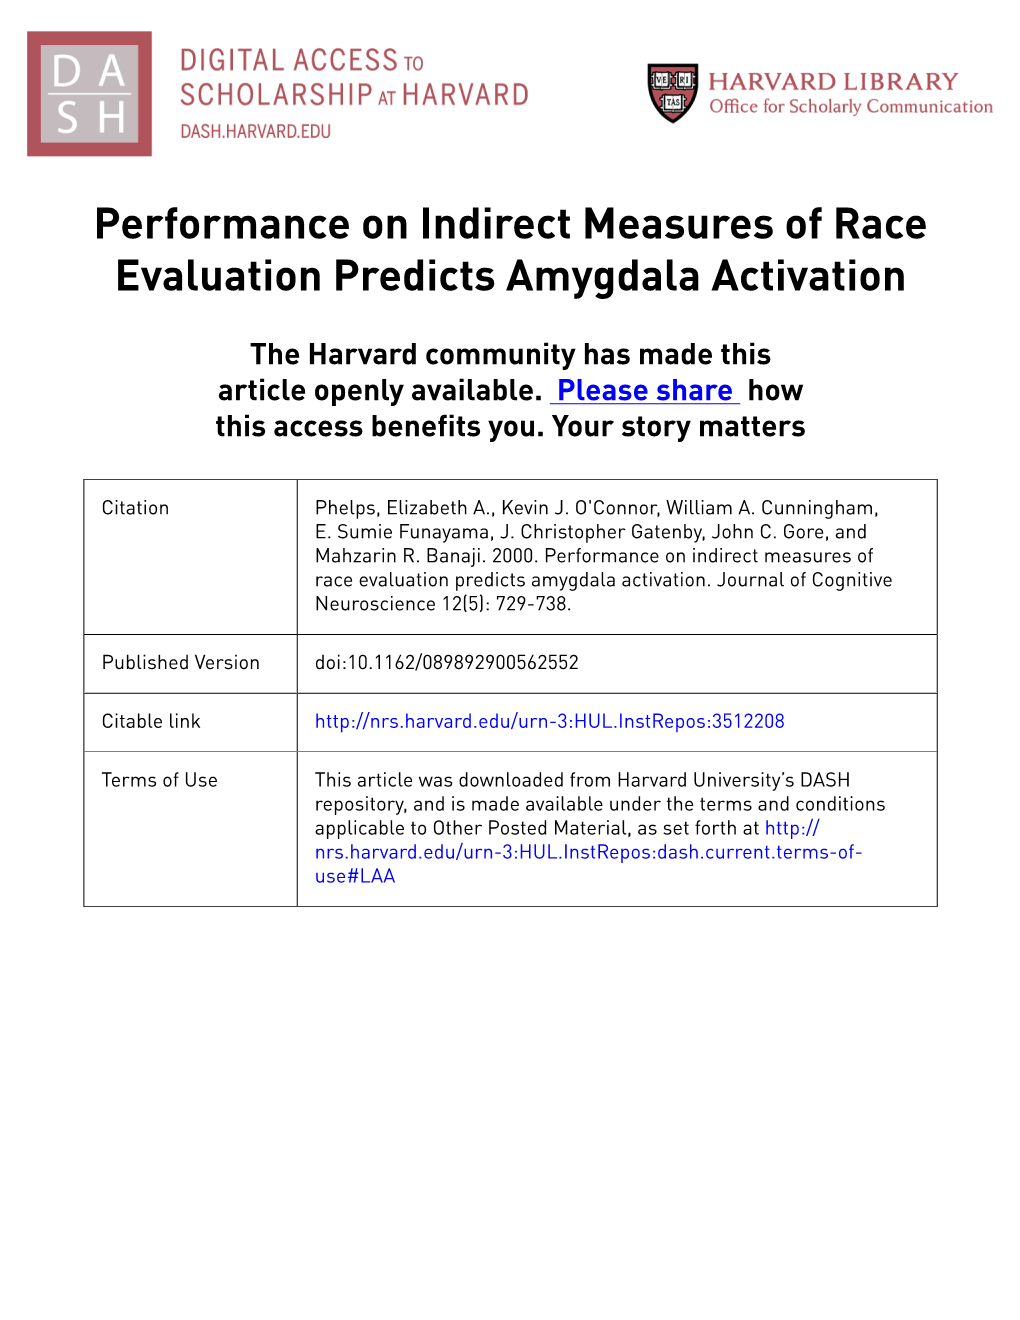 Performance on Indirect Measures of Race Evaluation Predicts Amygdala Activation